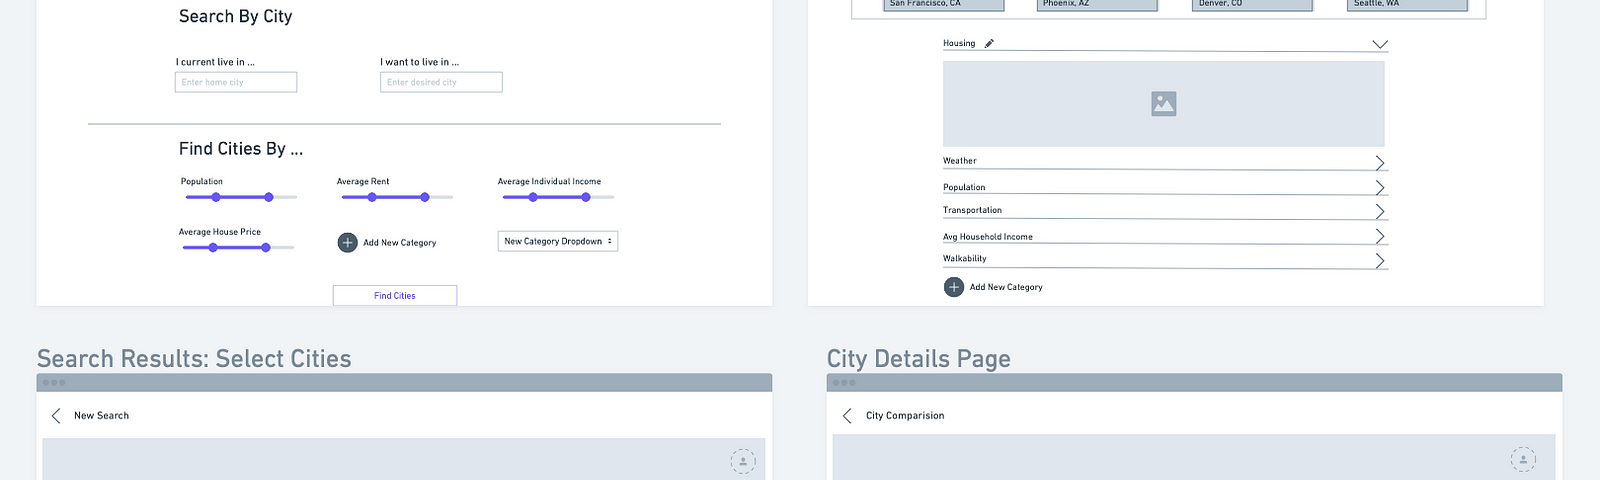 Wireframe designs of new Citrics user experience.